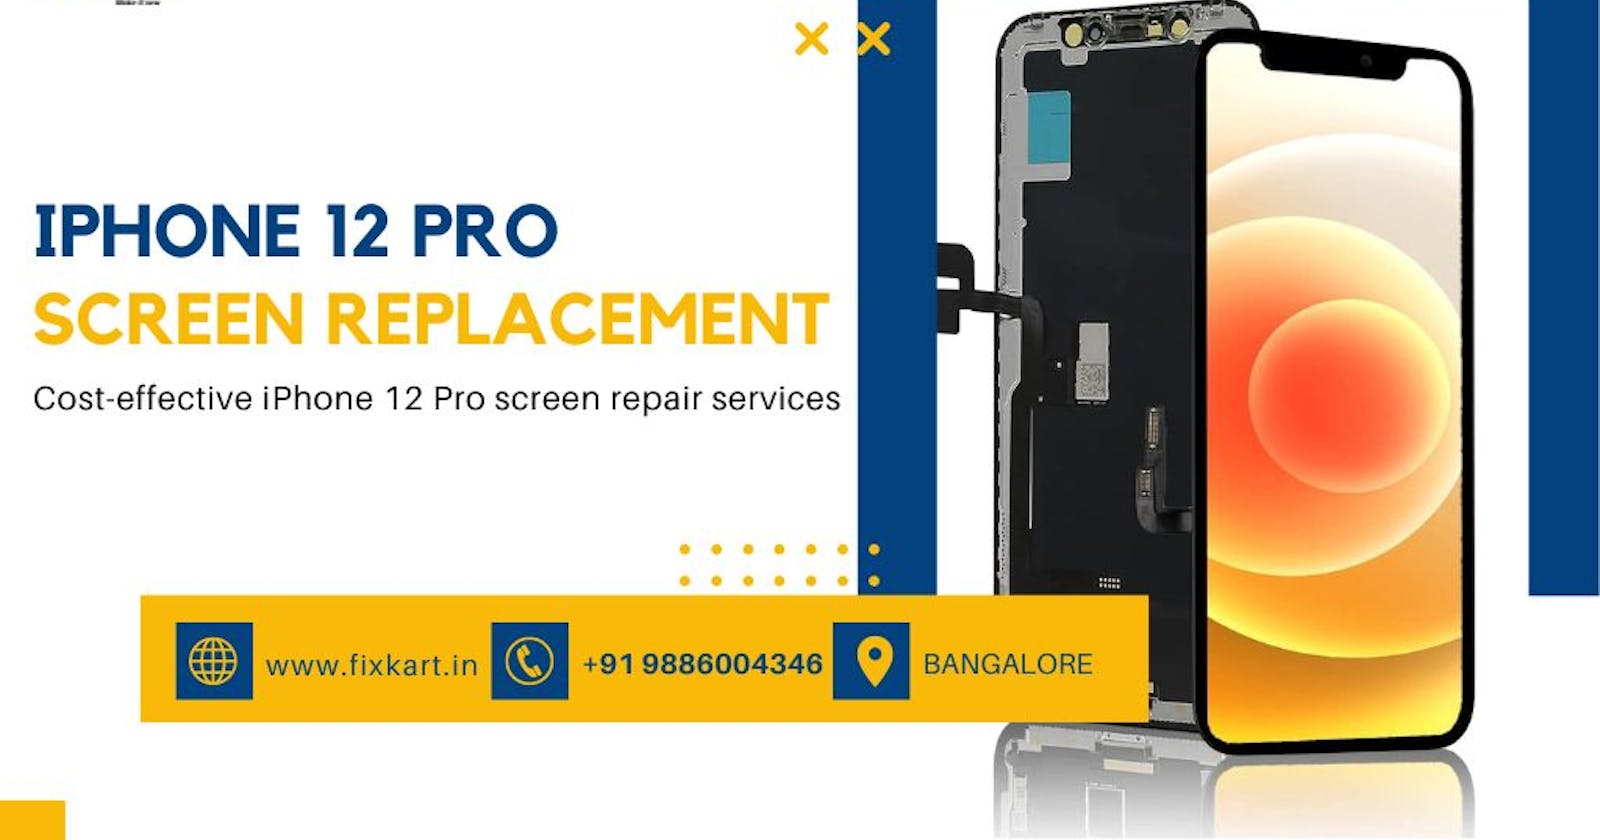 iPhone 12 pro screen replacement at affordable pricing with quality!